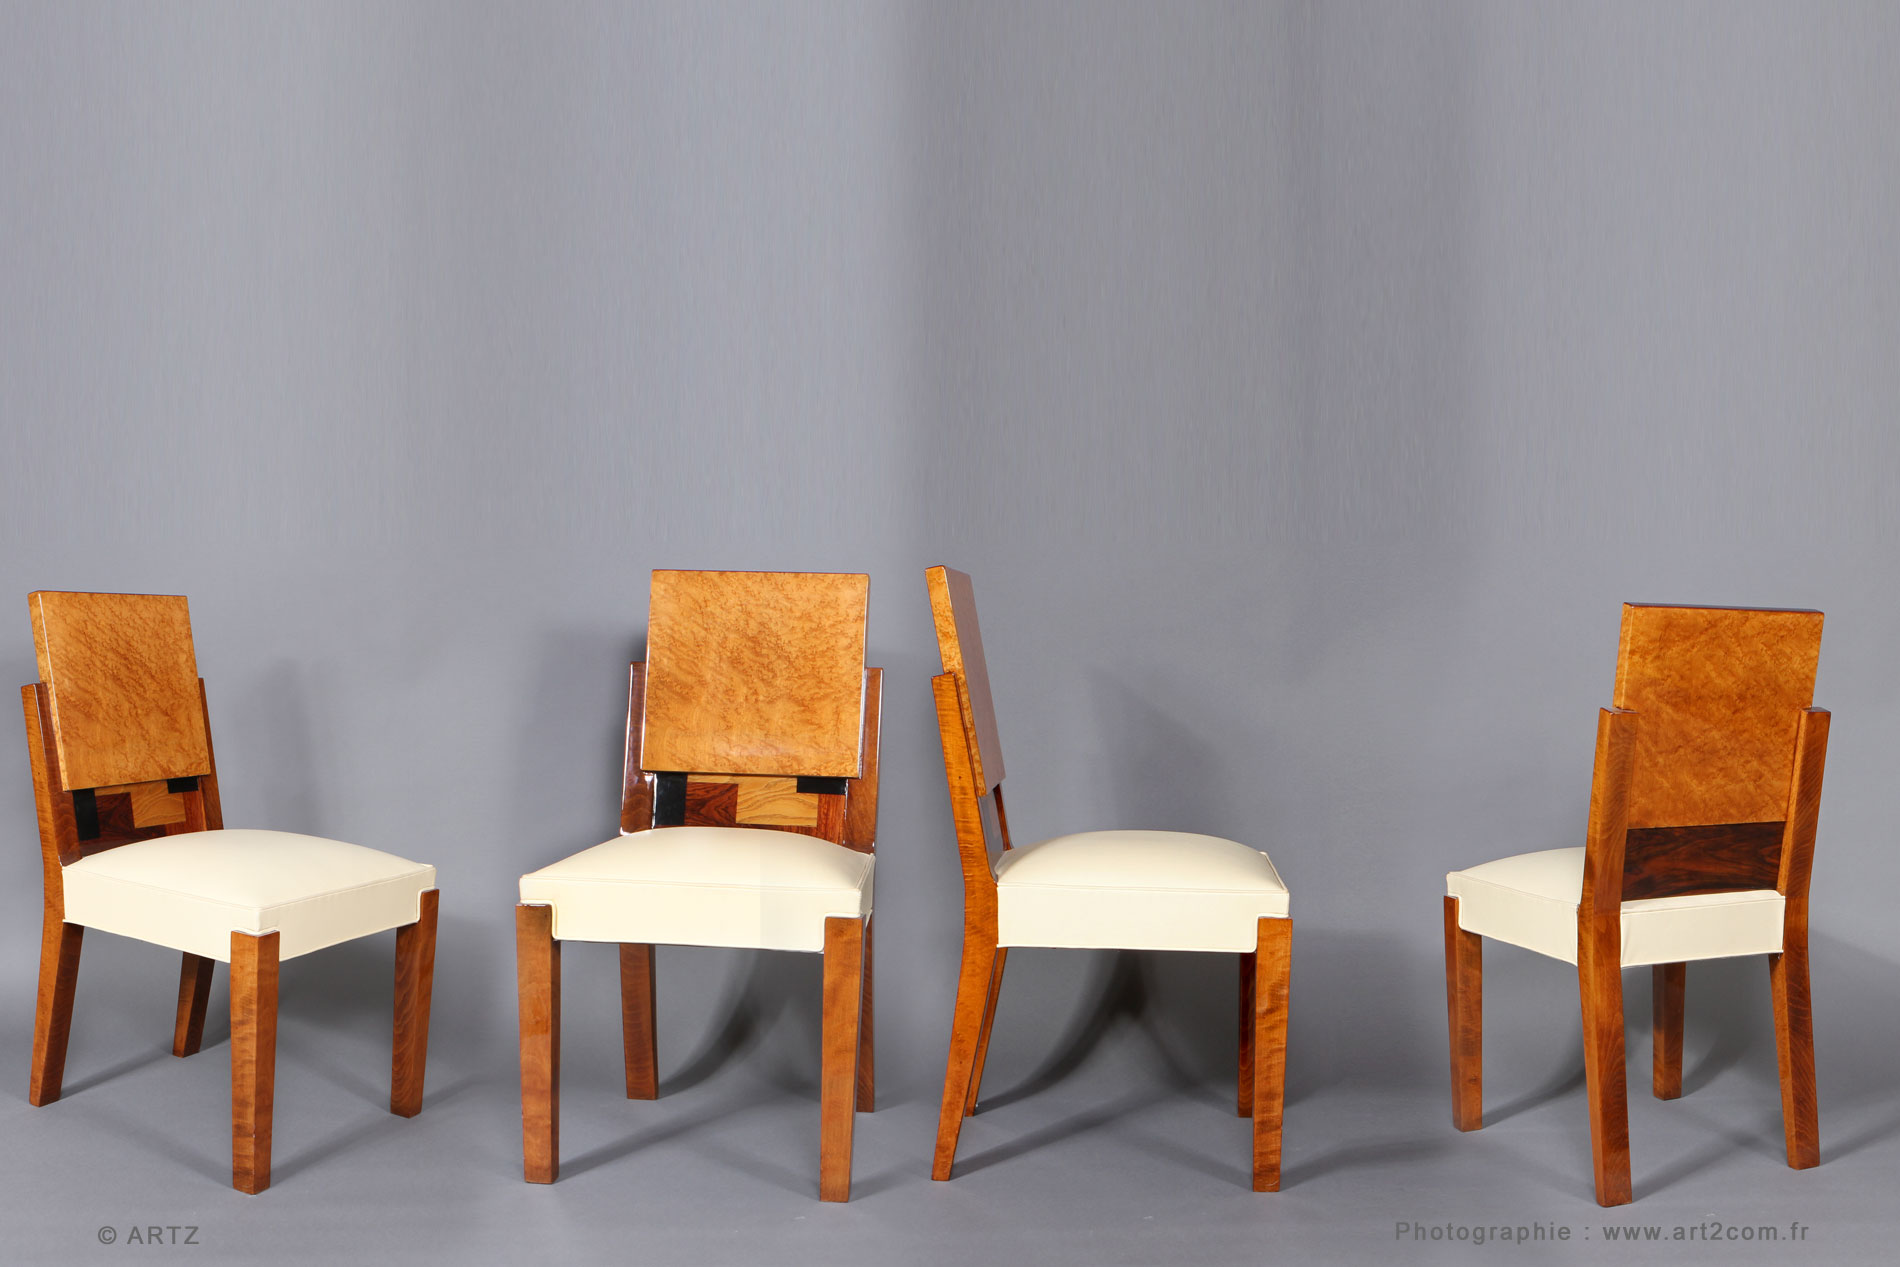 4 chairs M.DUFET